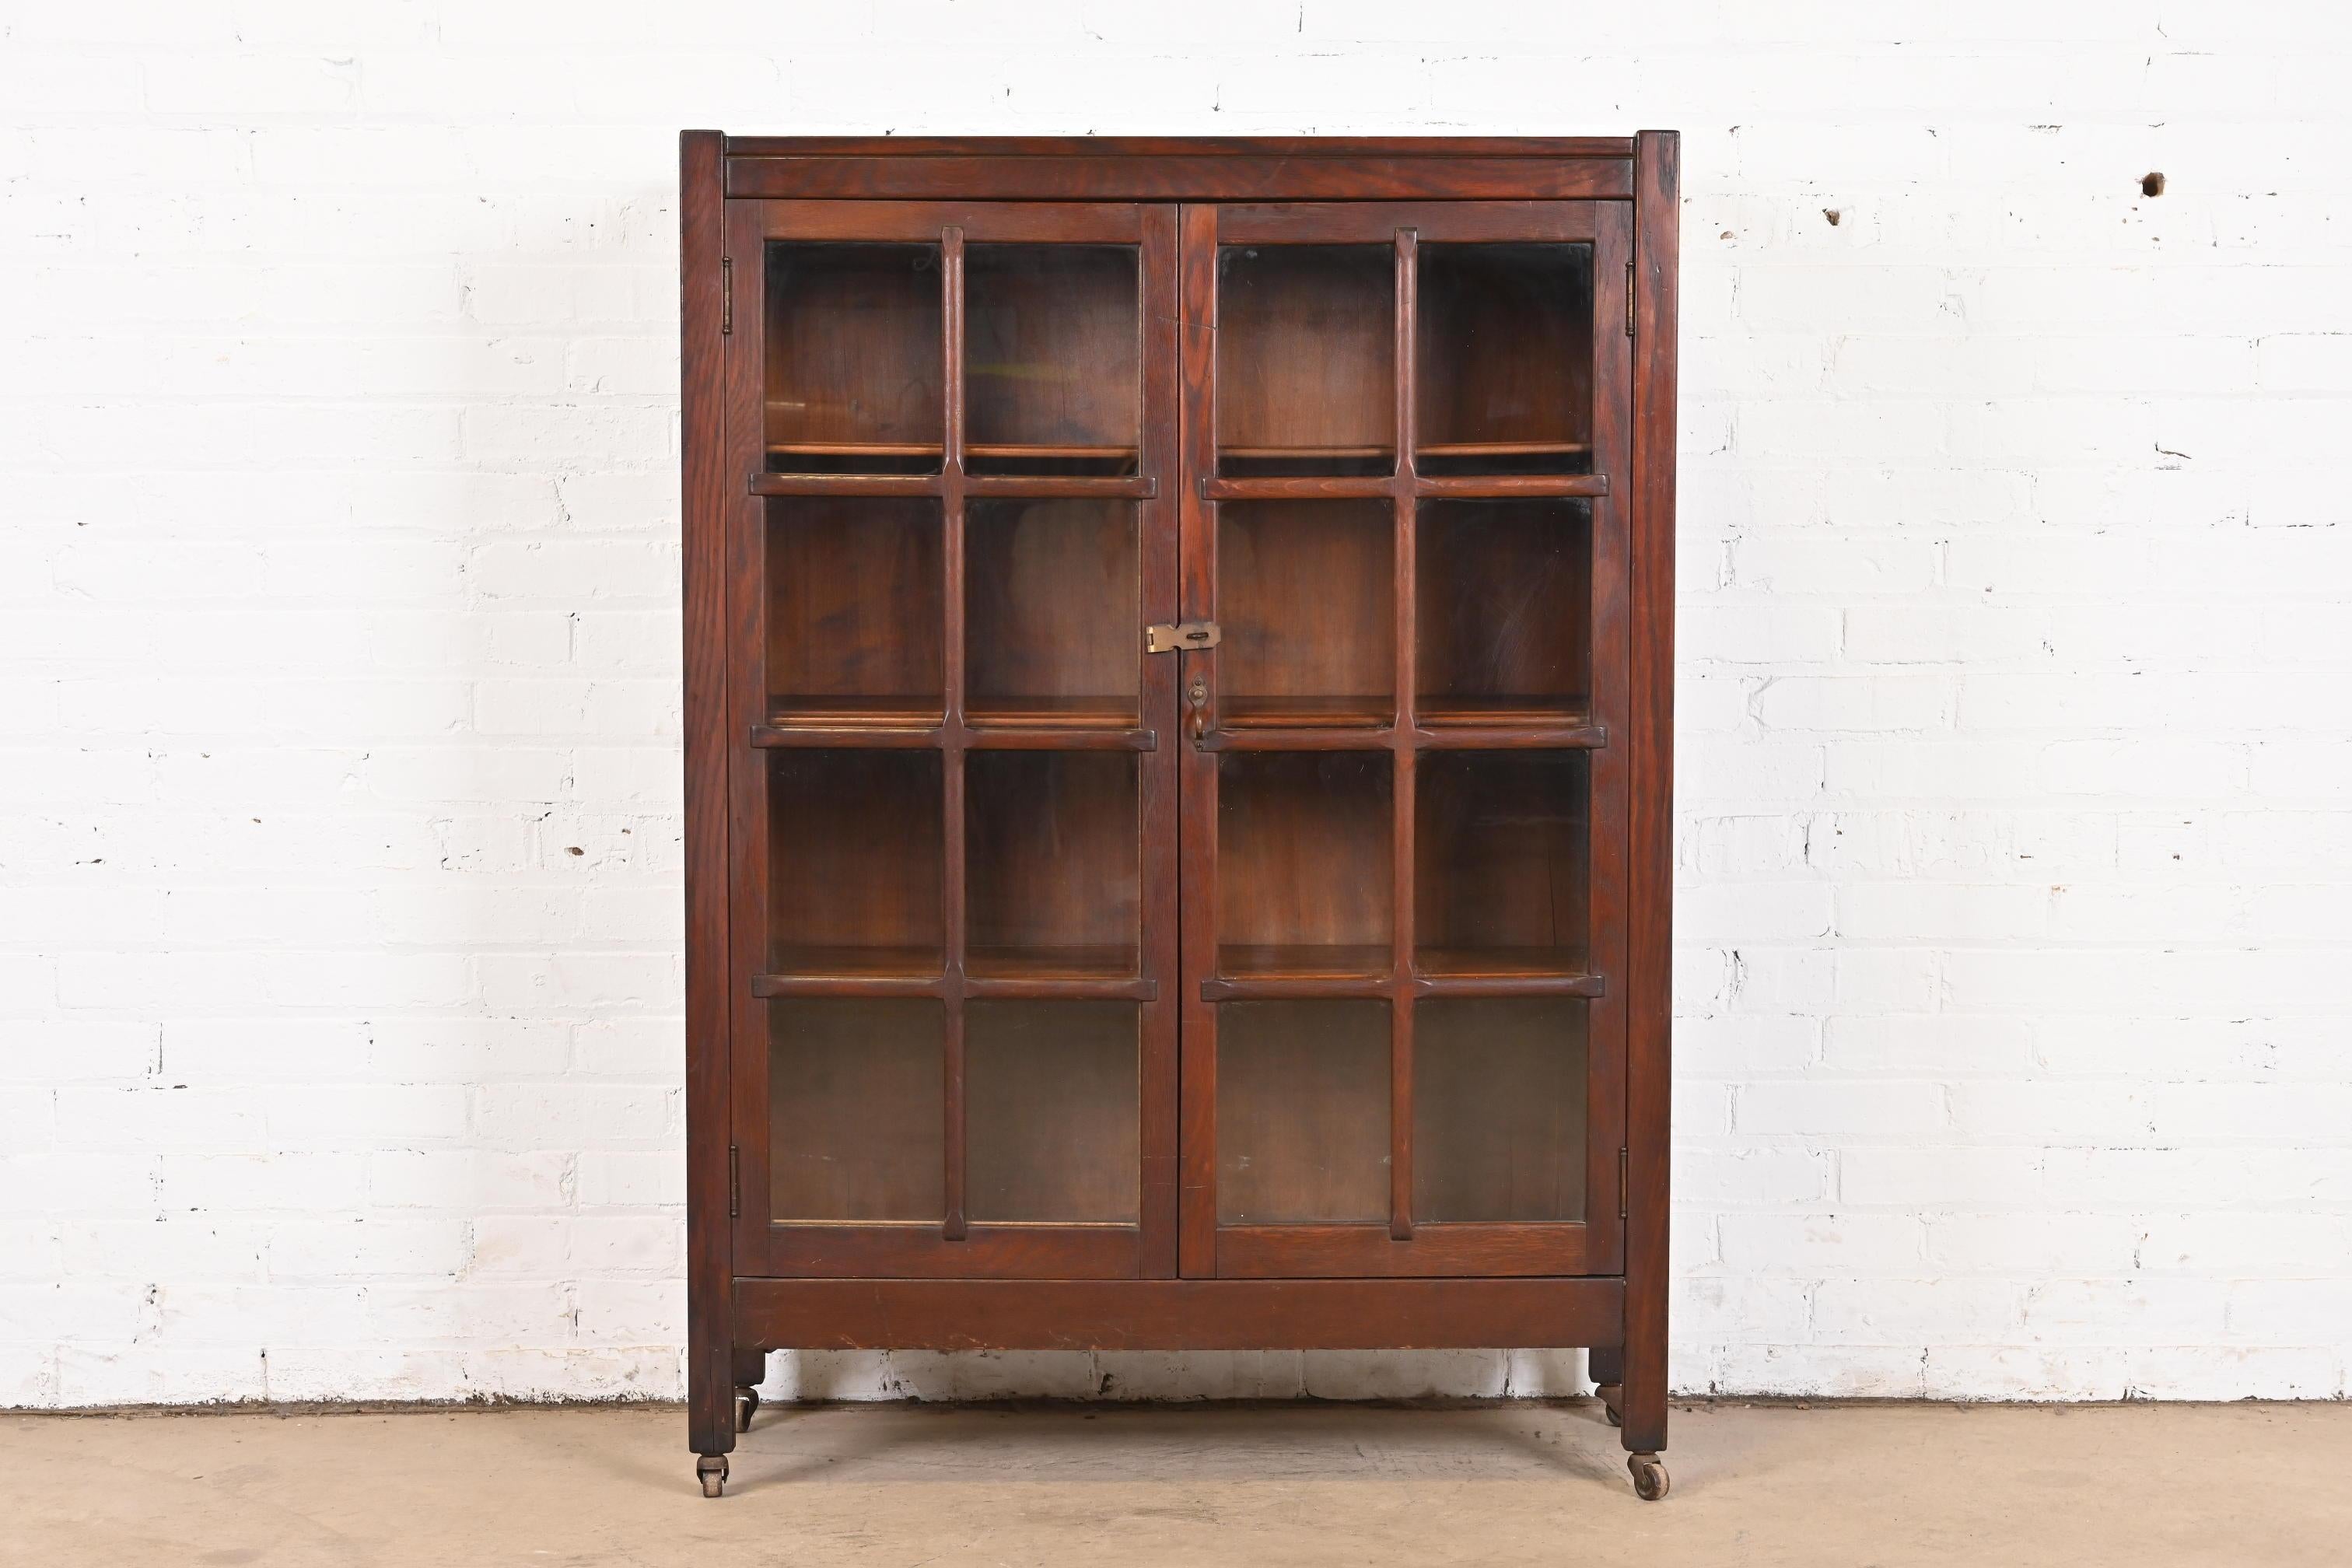 A gorgeous antique Mission or Arts & Crafts bookcase cabinet

In the manner of Stickley Brothers

USA, Circa 1900

Oak, with mullioned glass front doors, and original brass hardware. Shelves are adjustable and removable.

Measures: 35.75